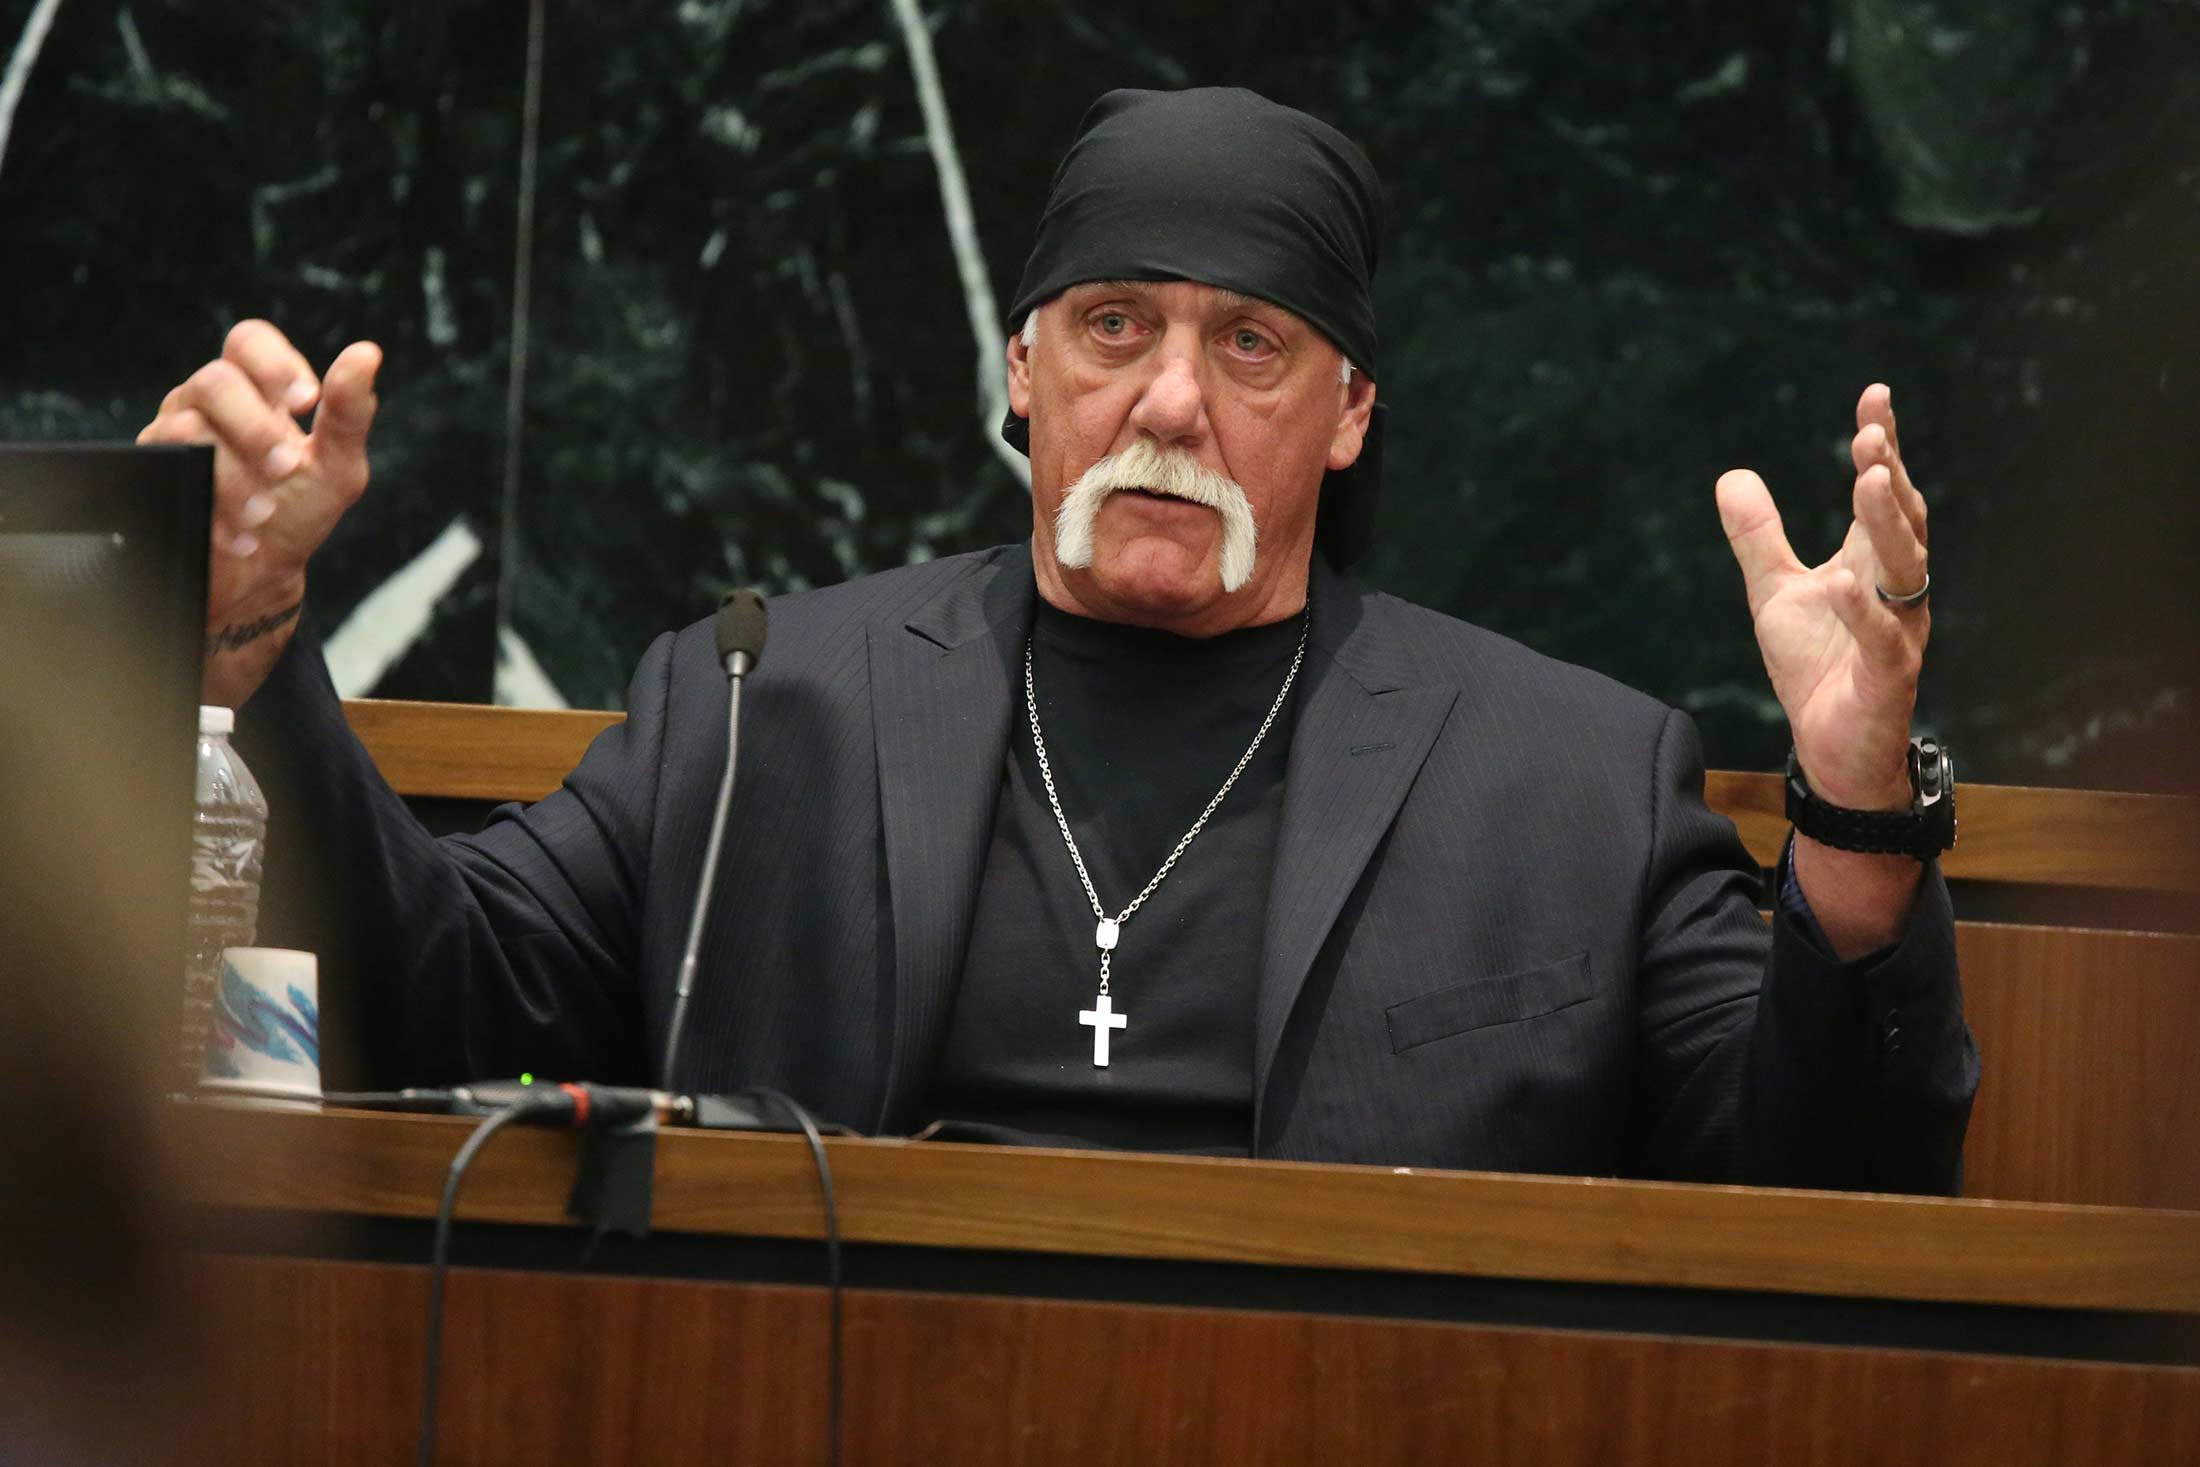 Terry Bollea, aka Hulk Hogan, testifies in court during his trial against Gawker Media at the Pinellas County Courthouse on March 8, 2016 in St Petersburg, Florida.
